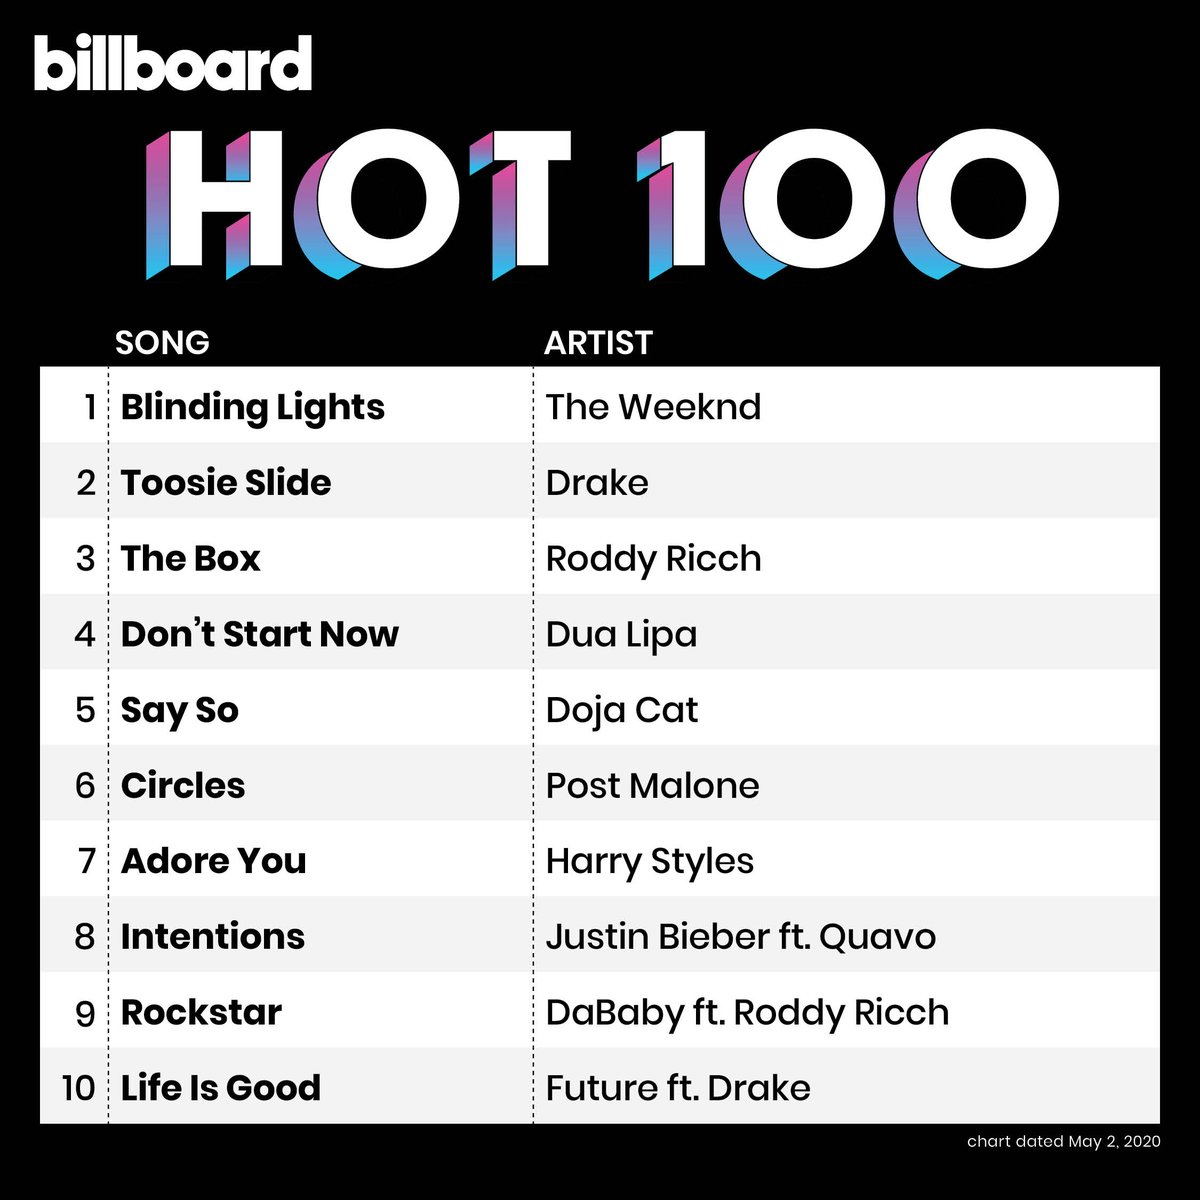 vand blomsten brændstof indhold billboard charts on Twitter: "The #Hot100 top 10 (chart dated May 2, 2020)  https://t.co/AXPrHKeQs0" / Twitter